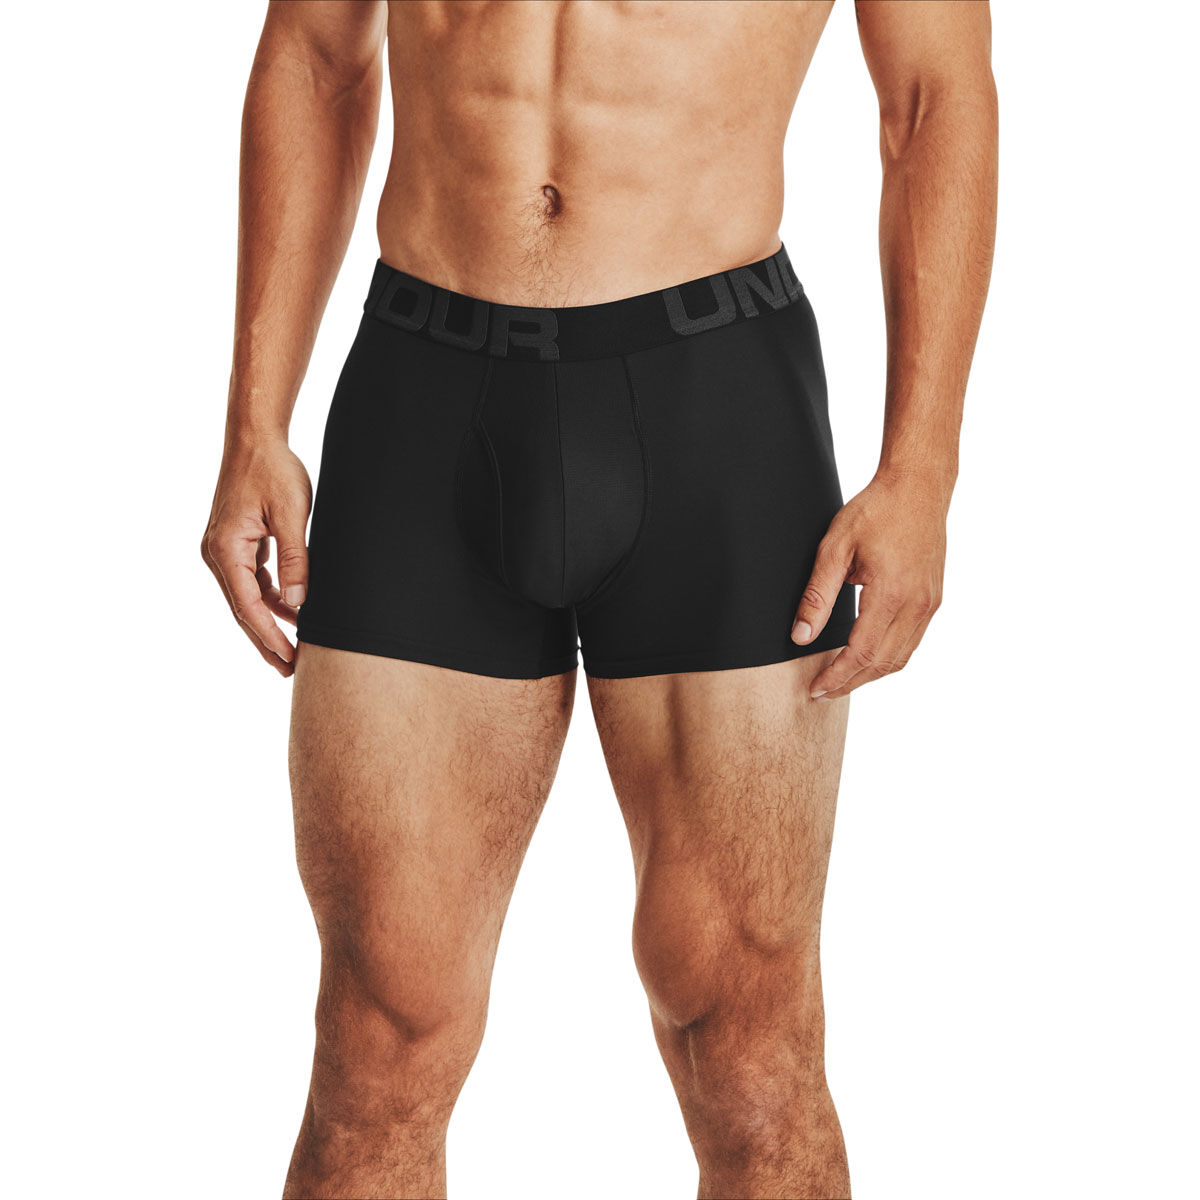 Under Armor Men's Tech Boxer 6in 2pk Black Medium - Delivered In As Fast As  15 Minutes